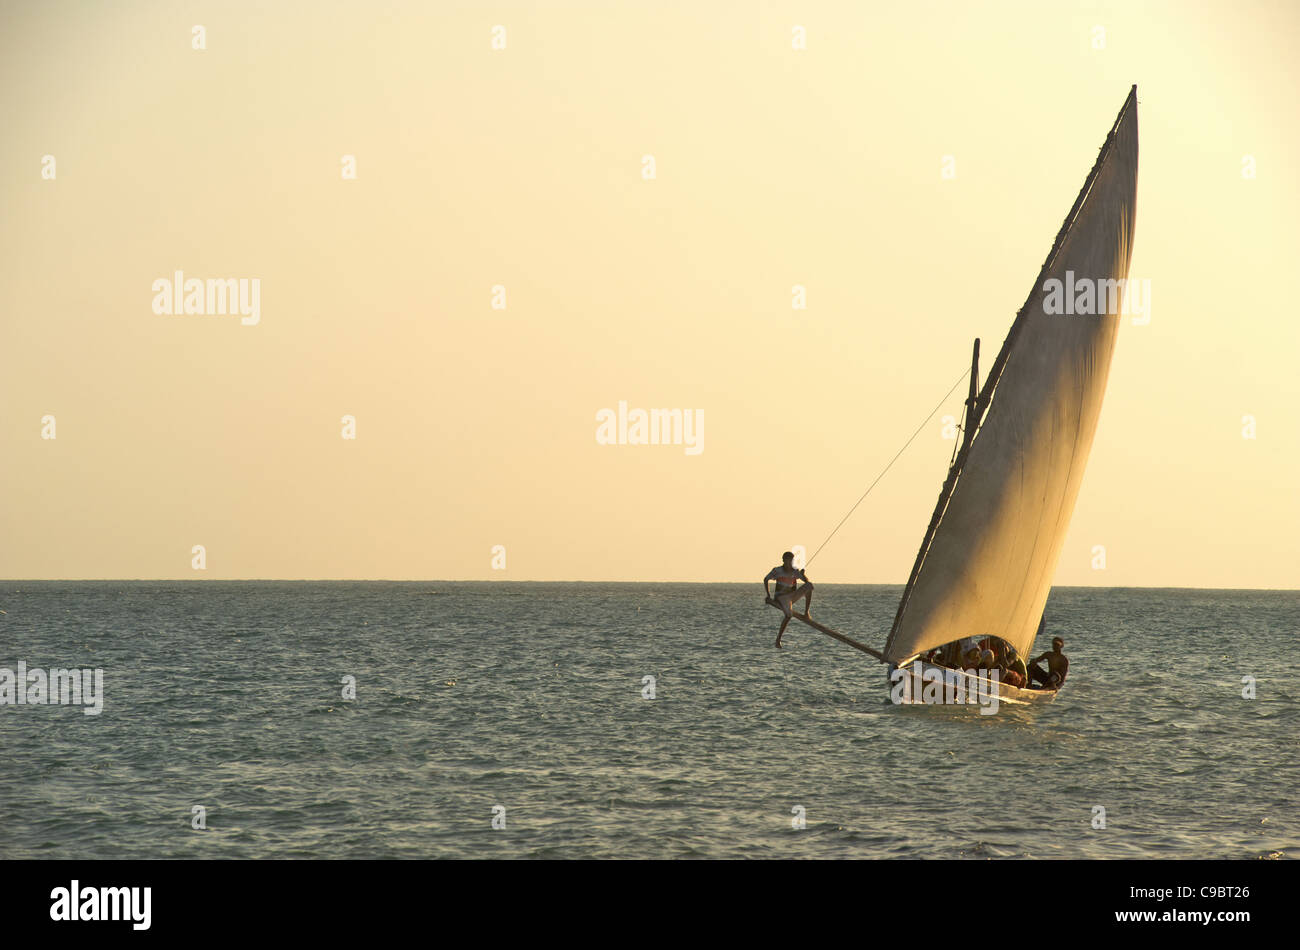 Sailboat on the open ocean at sunset Stock Photo